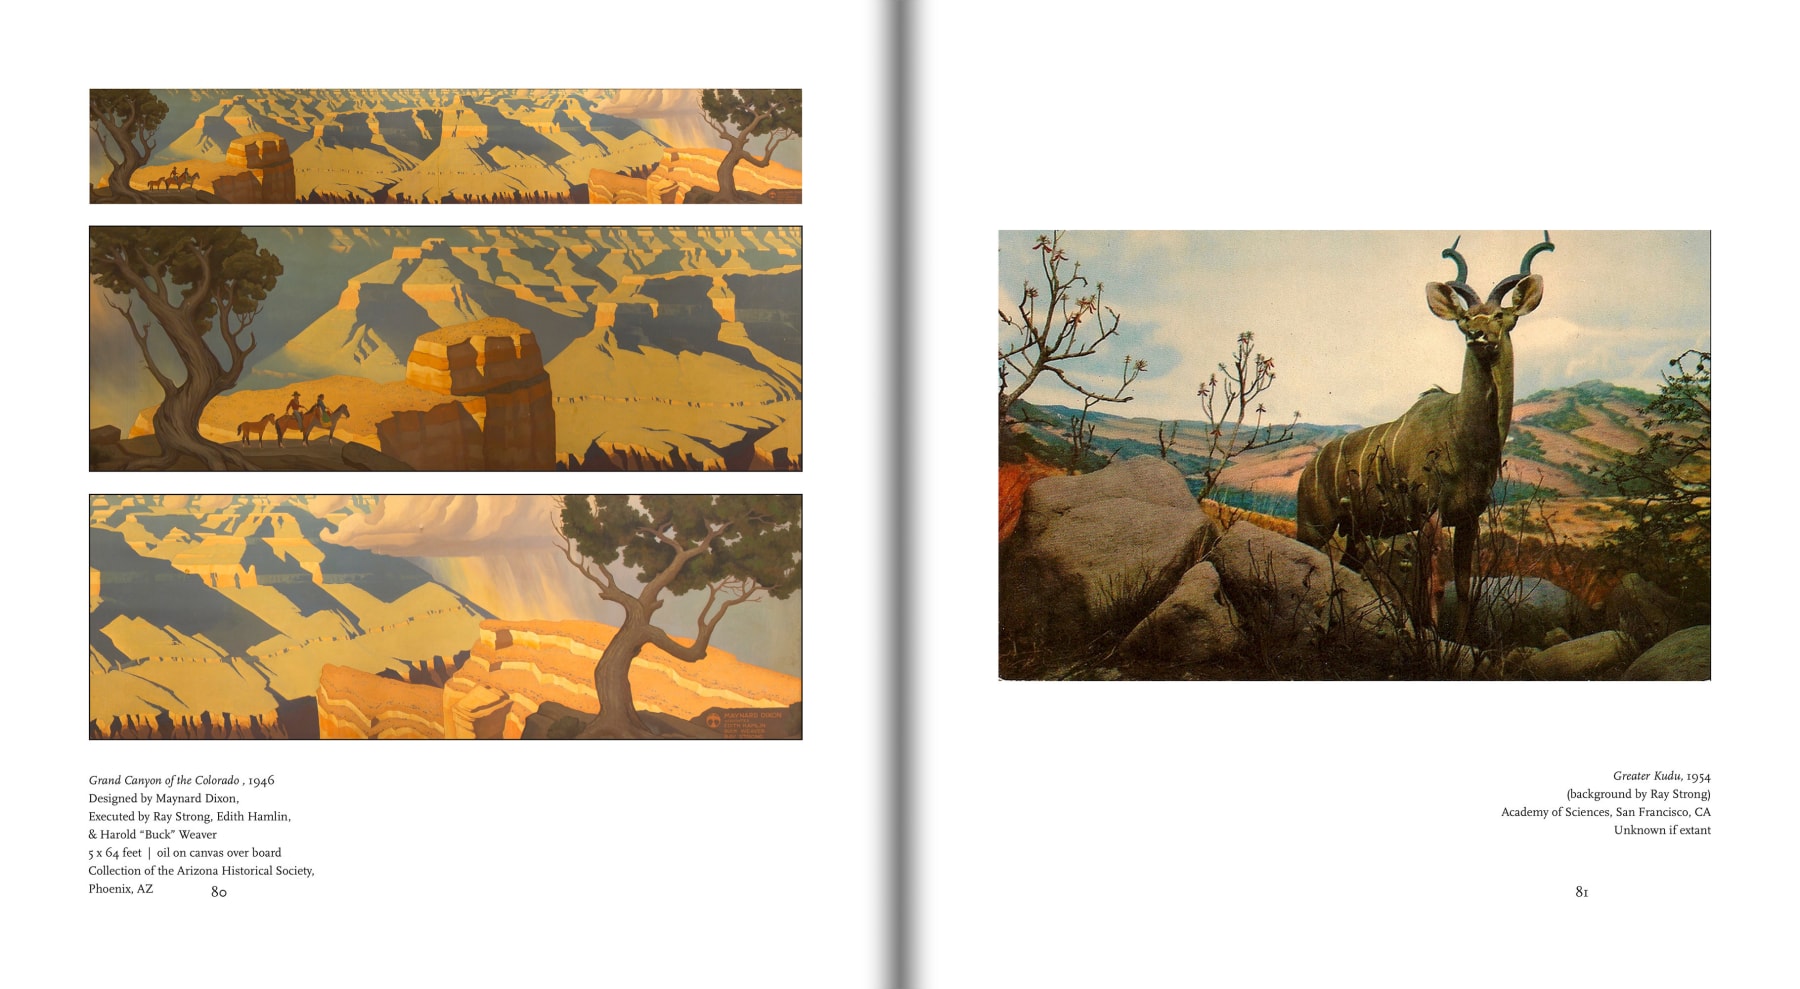 Pages 80 and 81 of RAY STRONG: American Artist, featuring a mural designed by Maynard Dixon and co-executed by Ray Strong, Edith Hamlin, &amp; Harold &quot;Buck&quot; Weaver as well as a backdrop by Ray Strong for the Academy of Sciences in San Francisco, CA